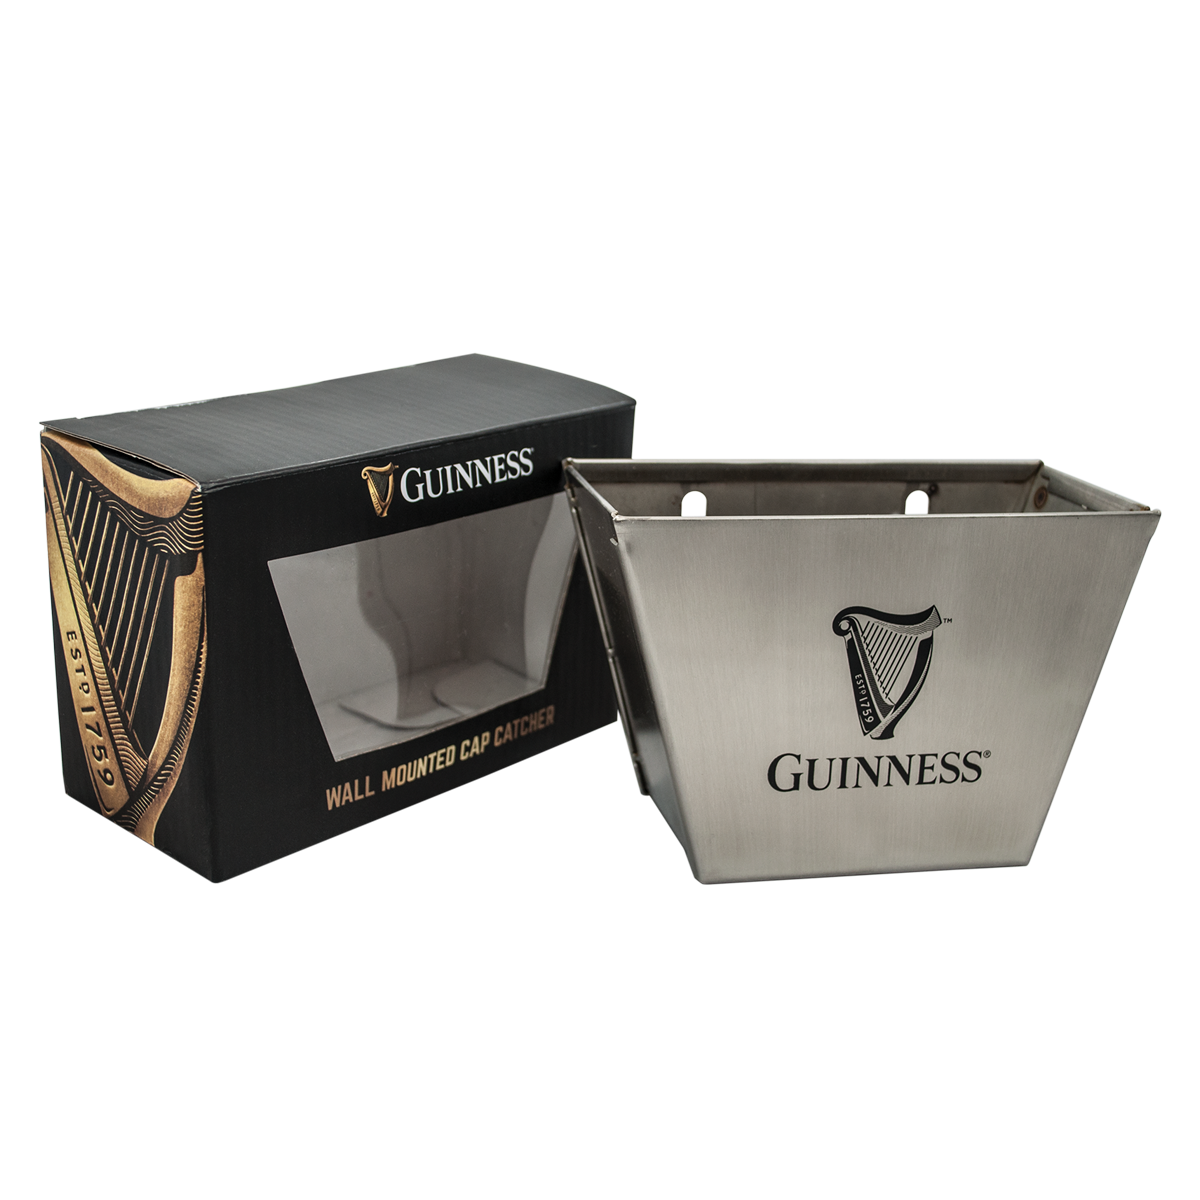 This Guinness Cap Catcher - Signature Boxed comes in a beautifully packaged box, complete with an engraved harp design. Perfect for displaying in your home bar or using as a bottle cap catcher during gatherings with friends.